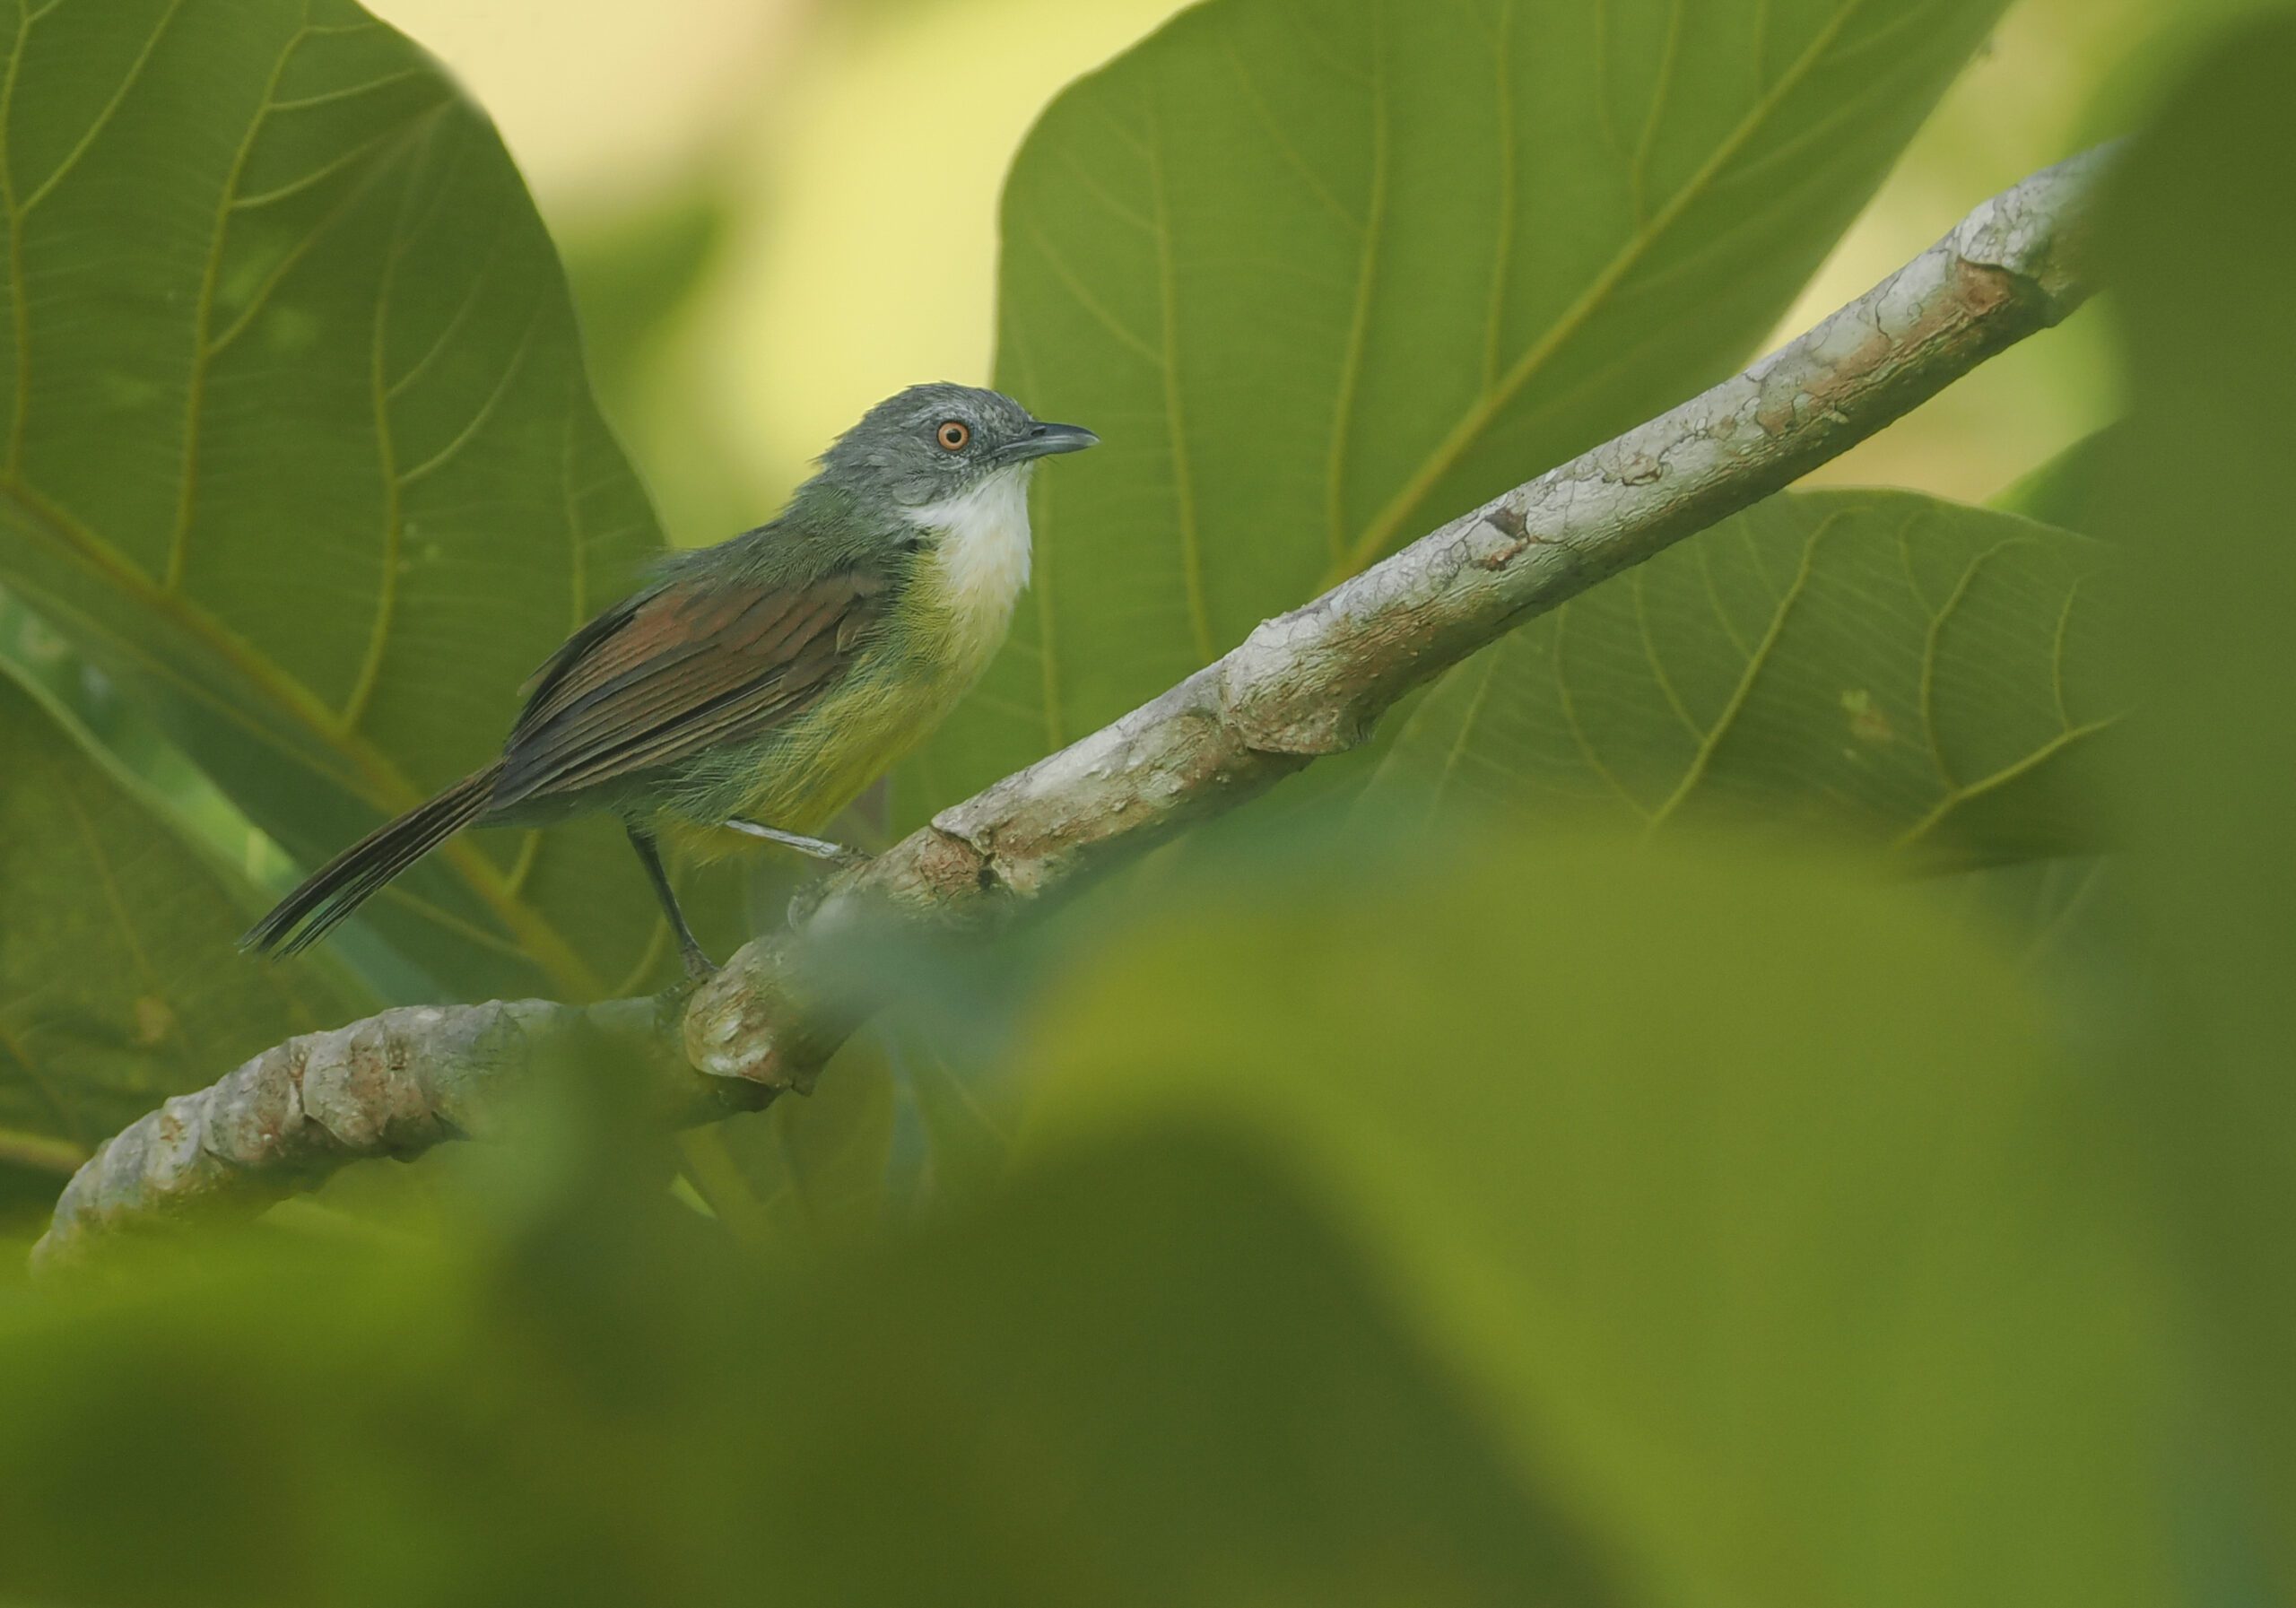 A brown-winged bird with a gray head, white chin and yellow abdomen perches on a branch and is almost hidden by the plant's leaves.